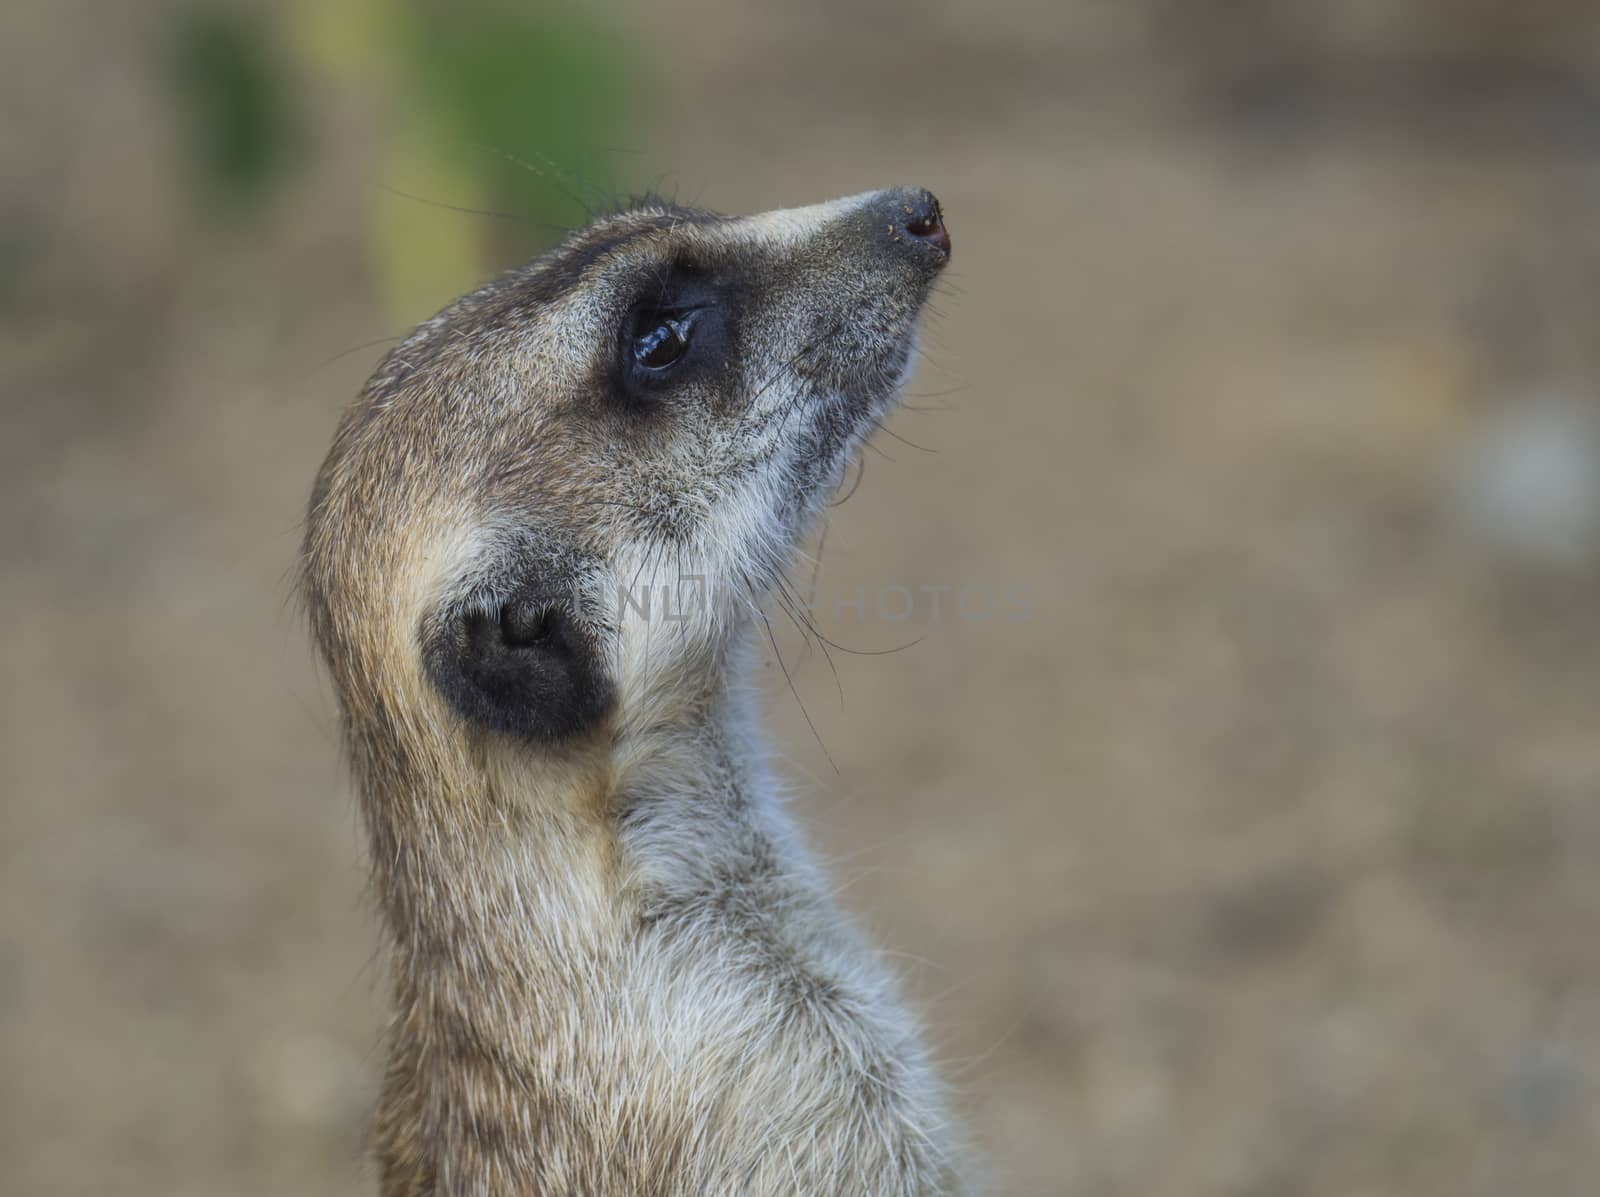 Close up portrait of meerkat or suricate, Suricata suricatta profile side view, selective focus, copy space for text by Henkeova